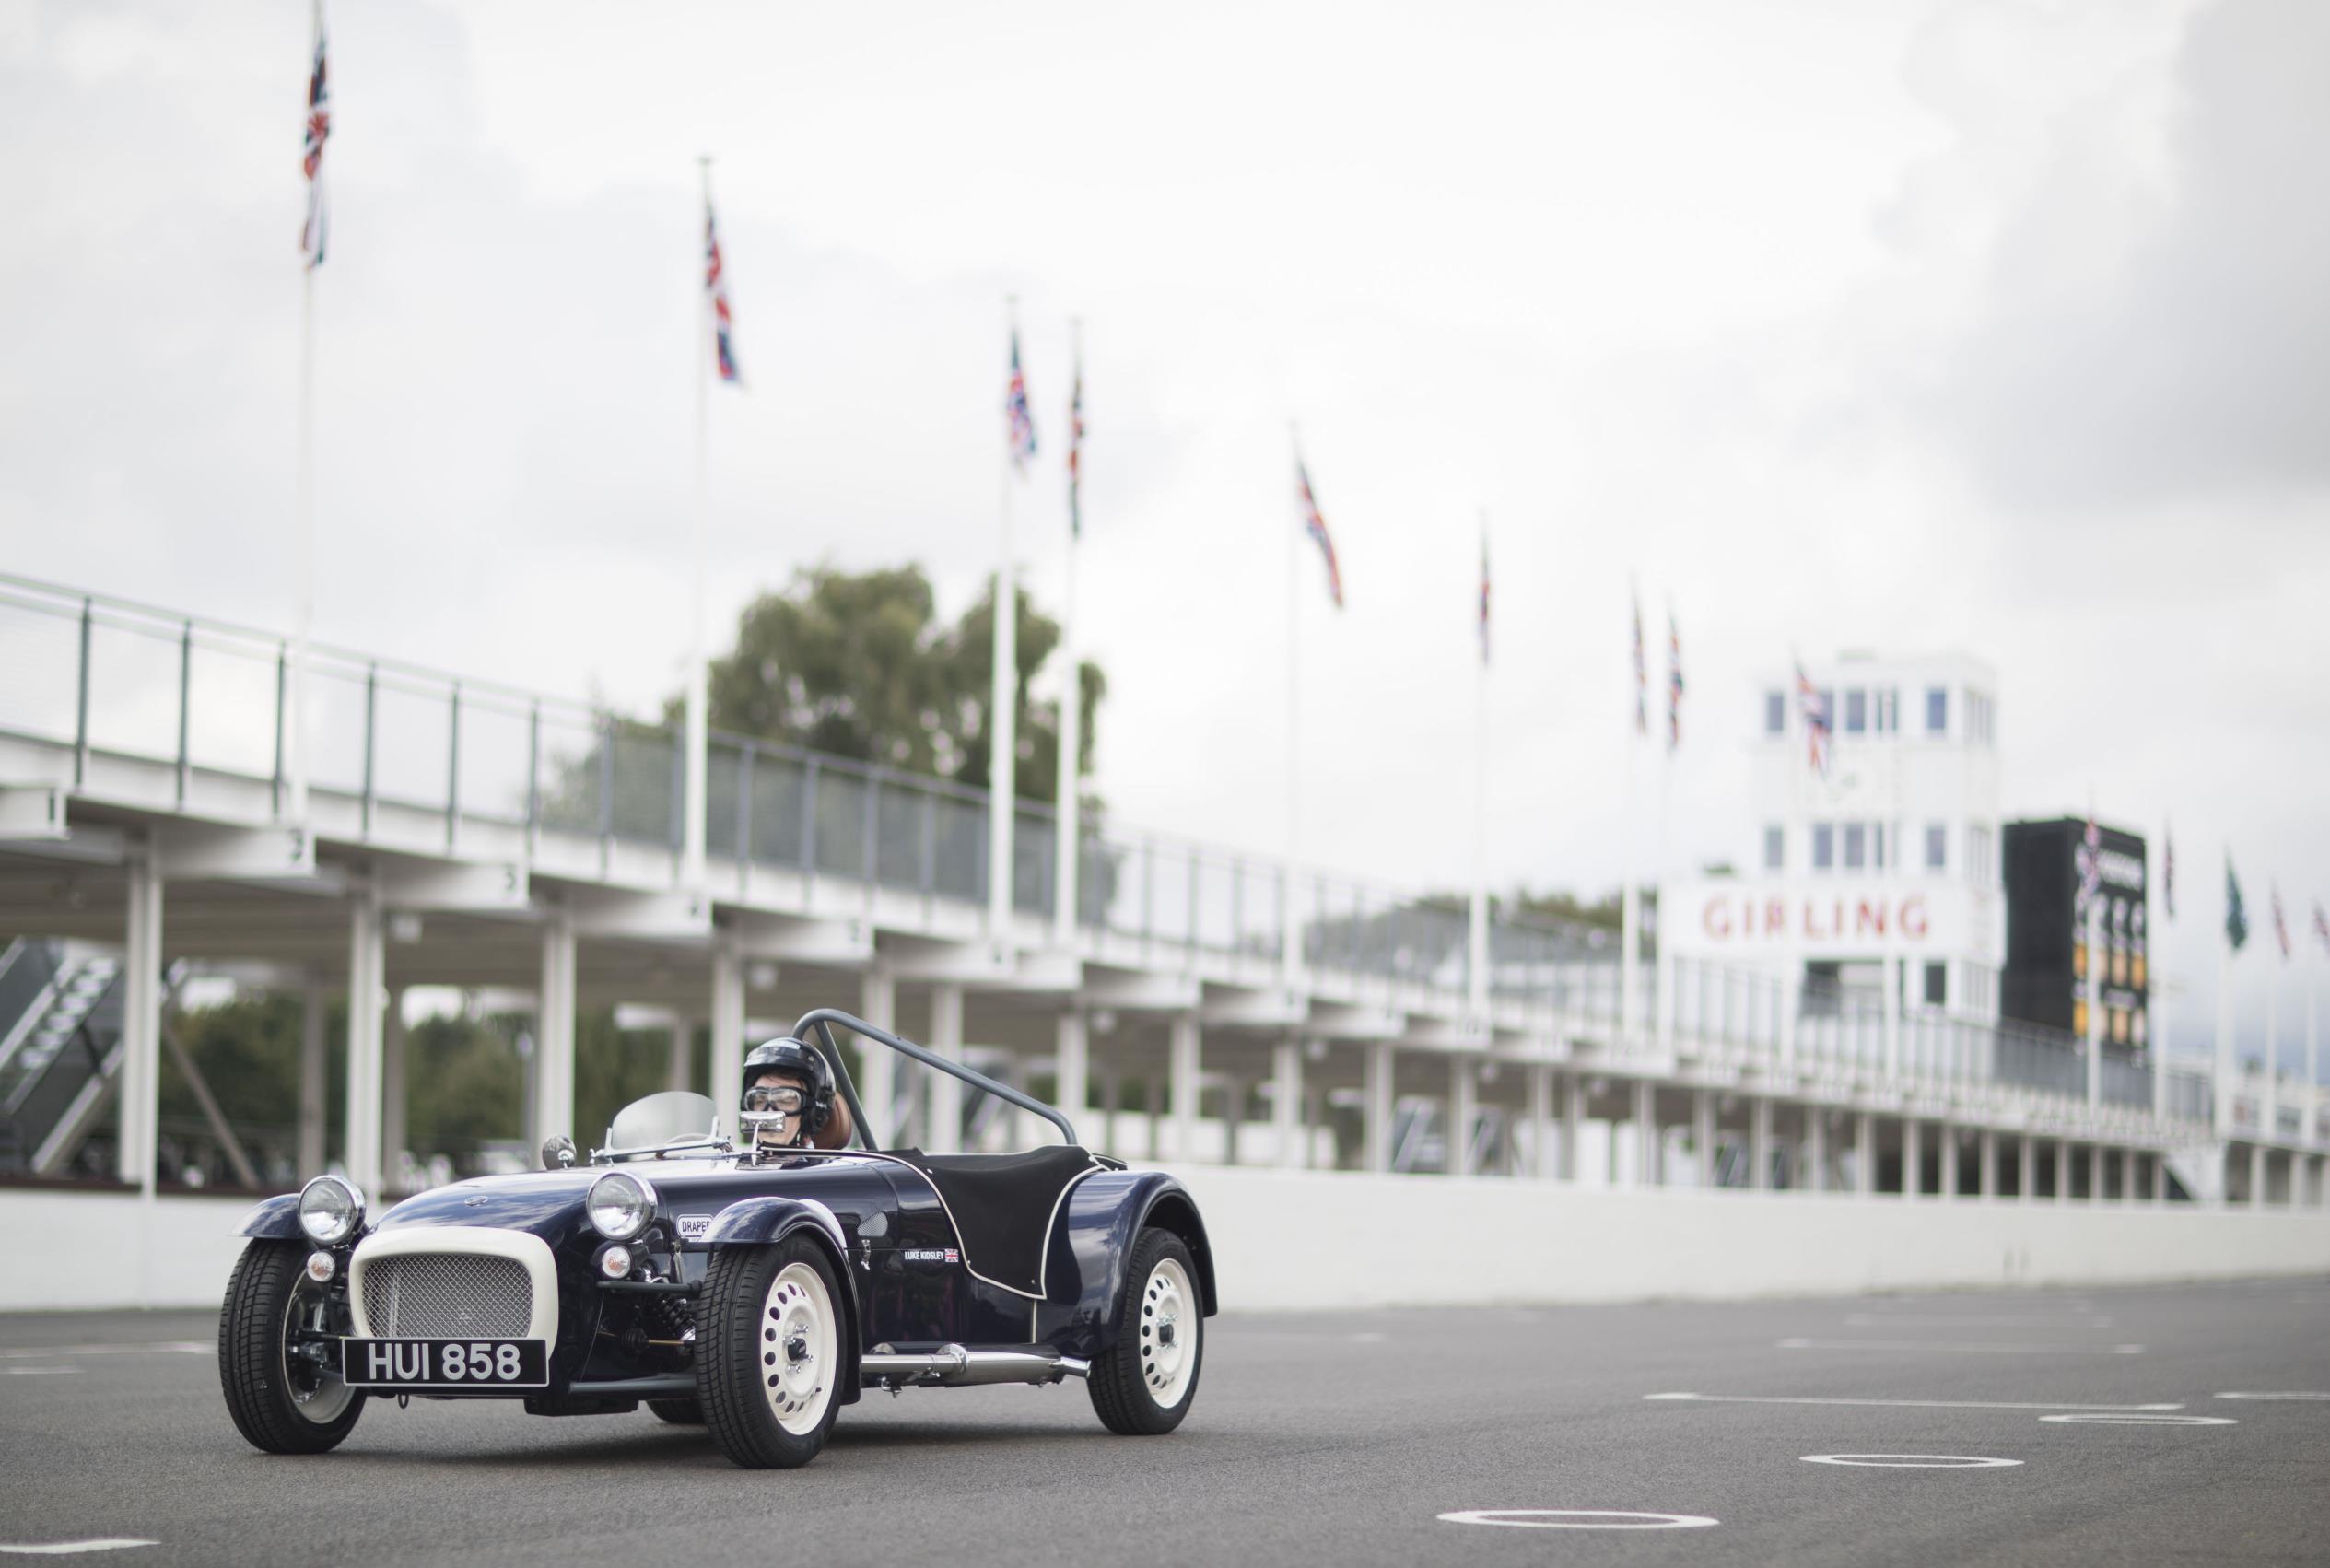 Caterham Launches Limited Edition Retro Racer